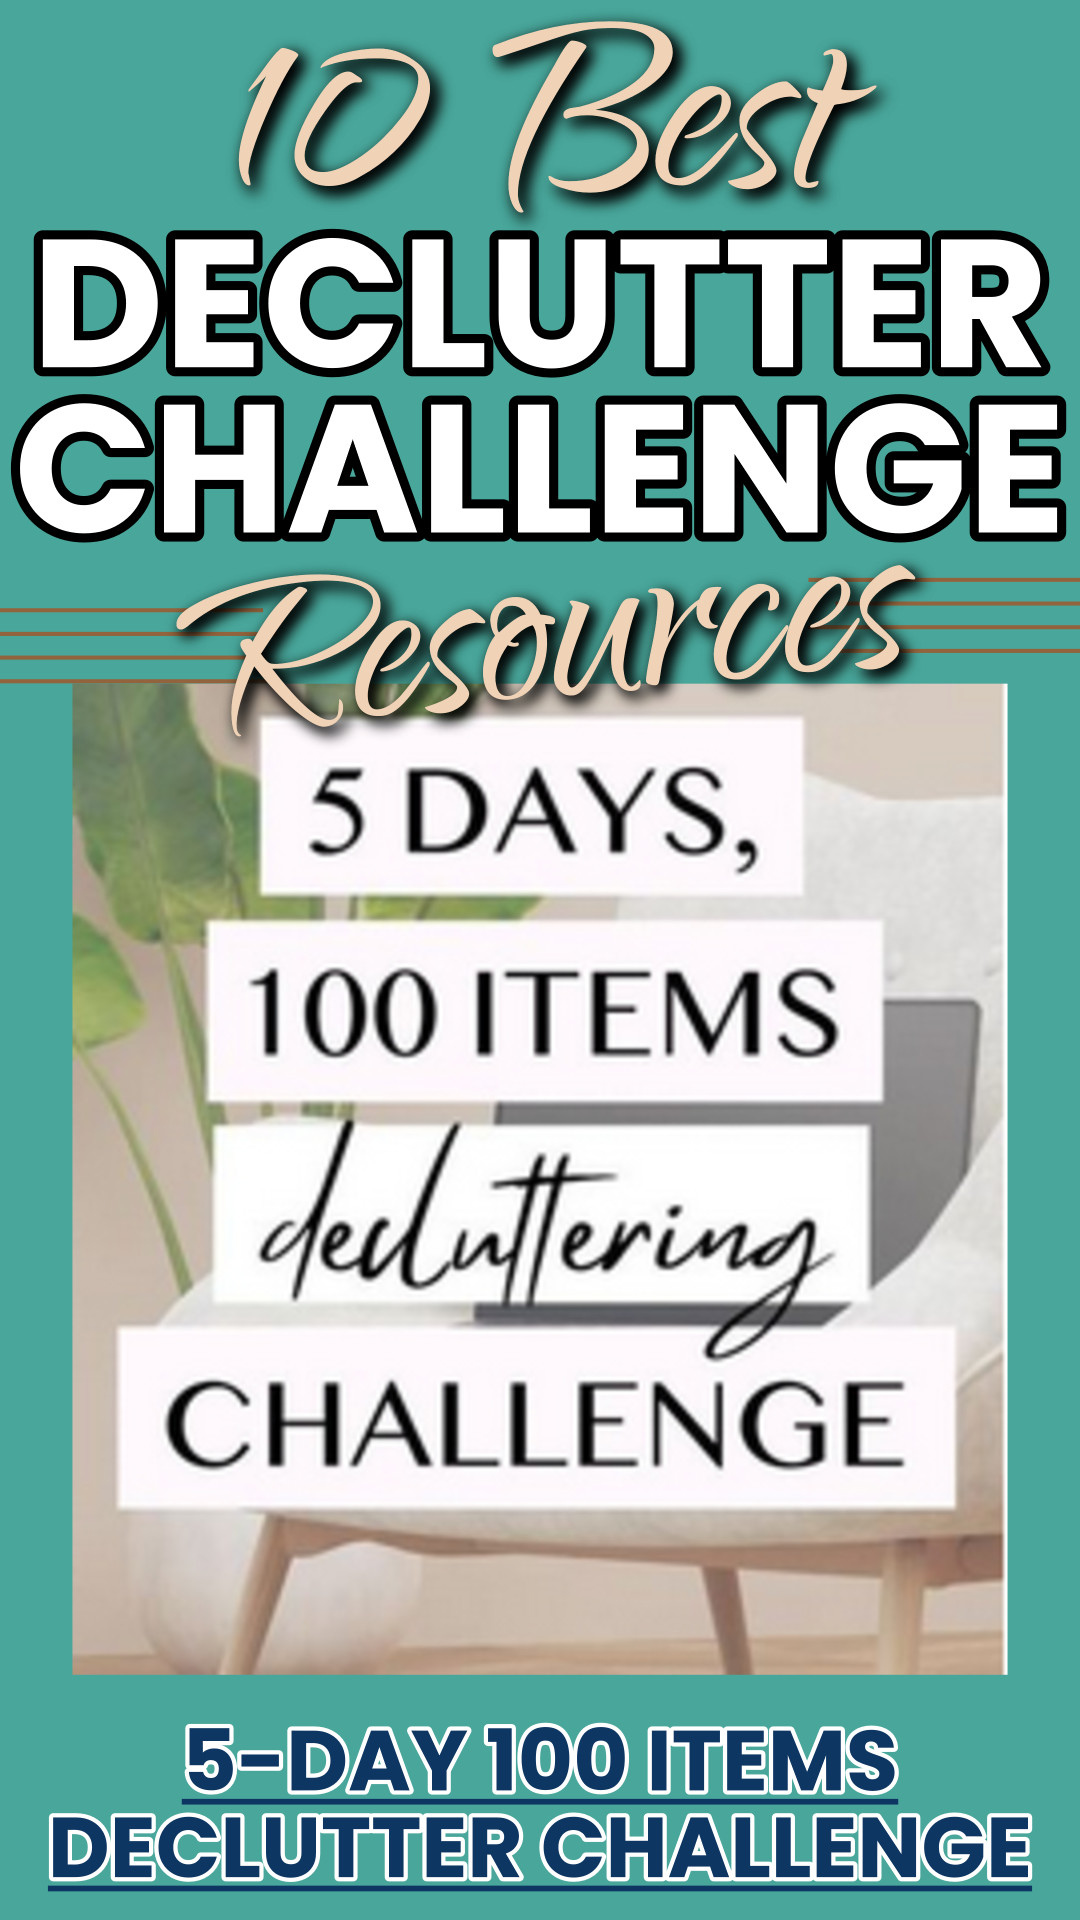 5 day 100 daily declutter items challenge